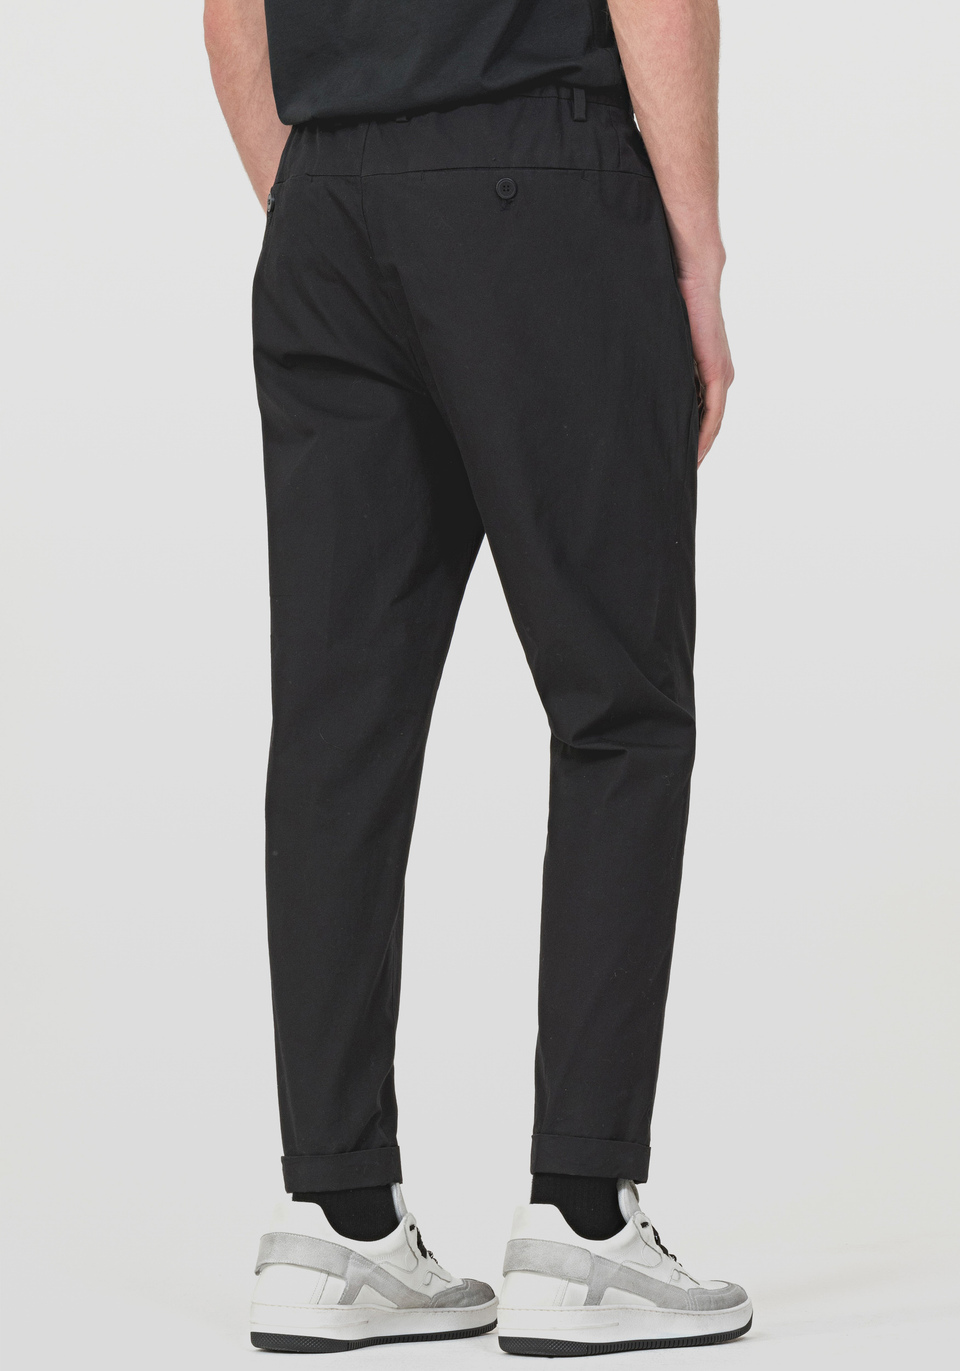 COMFORT-FIT CARROT-STYLE TROUSERS IN 100% COTTON WITH A DROPPED CROTCH - Antony Morato Online Shop